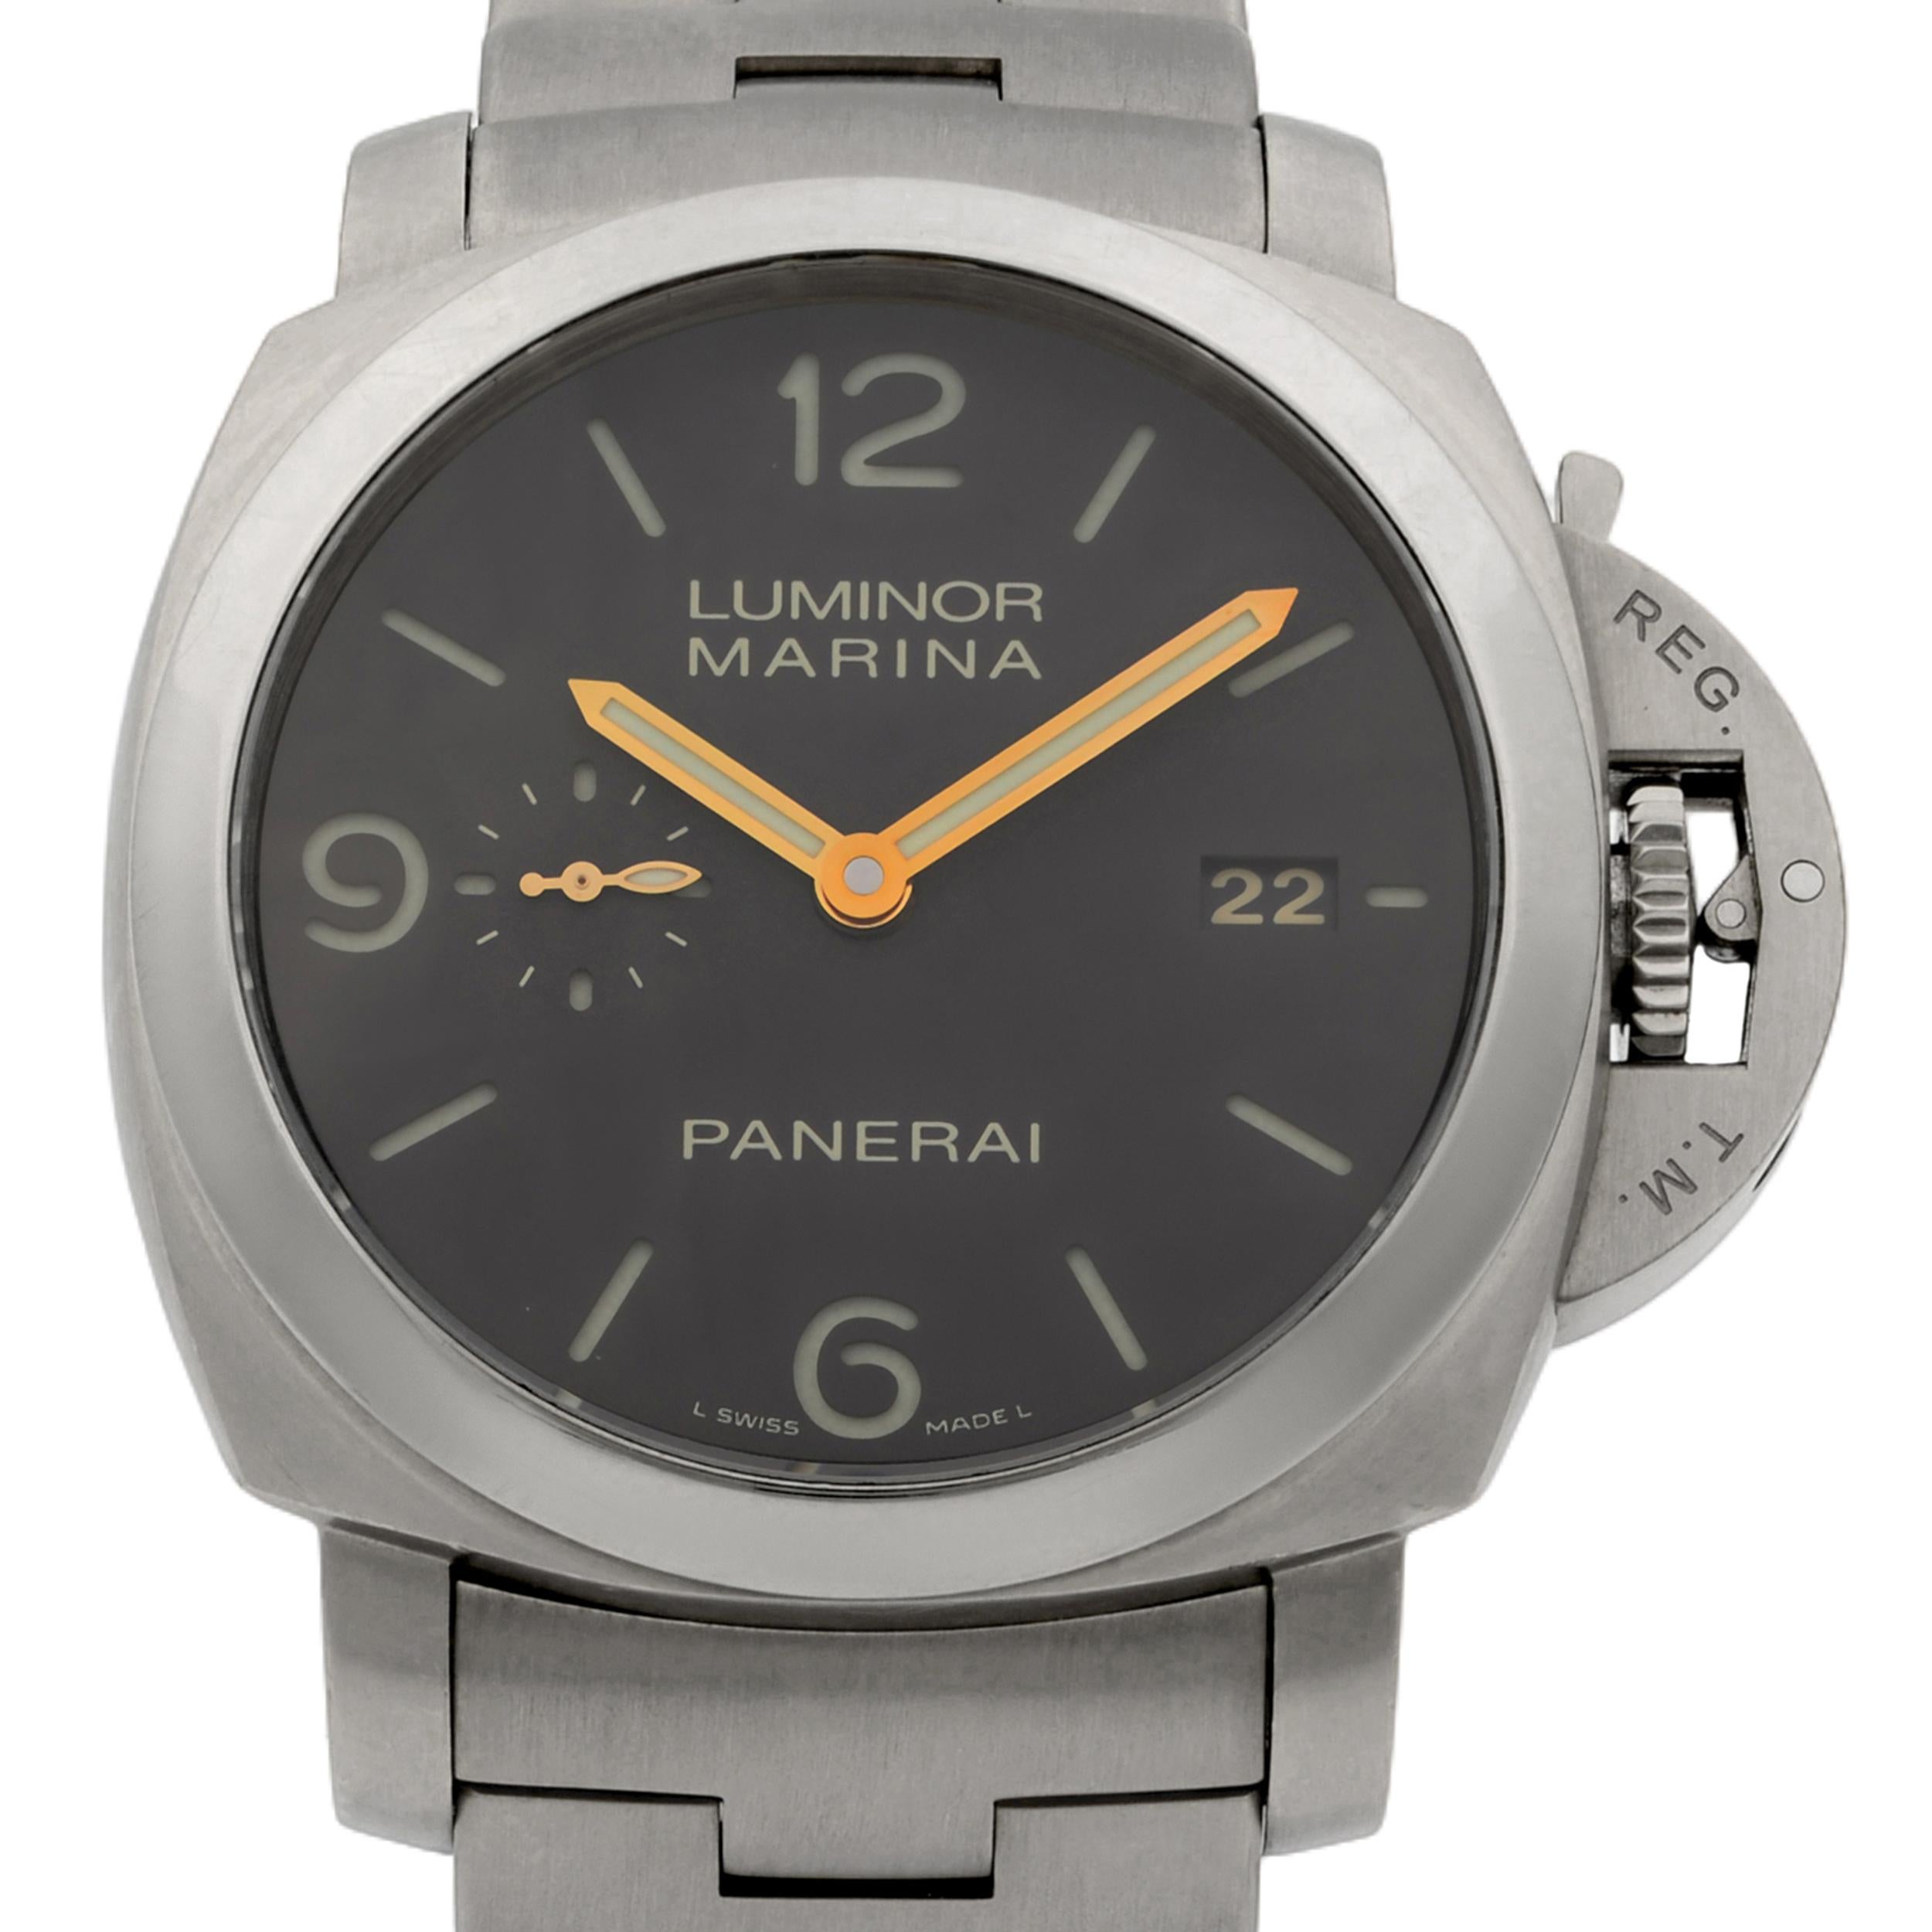 This pre-owned Panerai Luminor Marina PAM00352 is a beautiful men's timepiece that is powered by mechanical (automatic) movement which is cased in a titanium case. It has a square shape face, date indicator, small seconds subdial dial and has hand